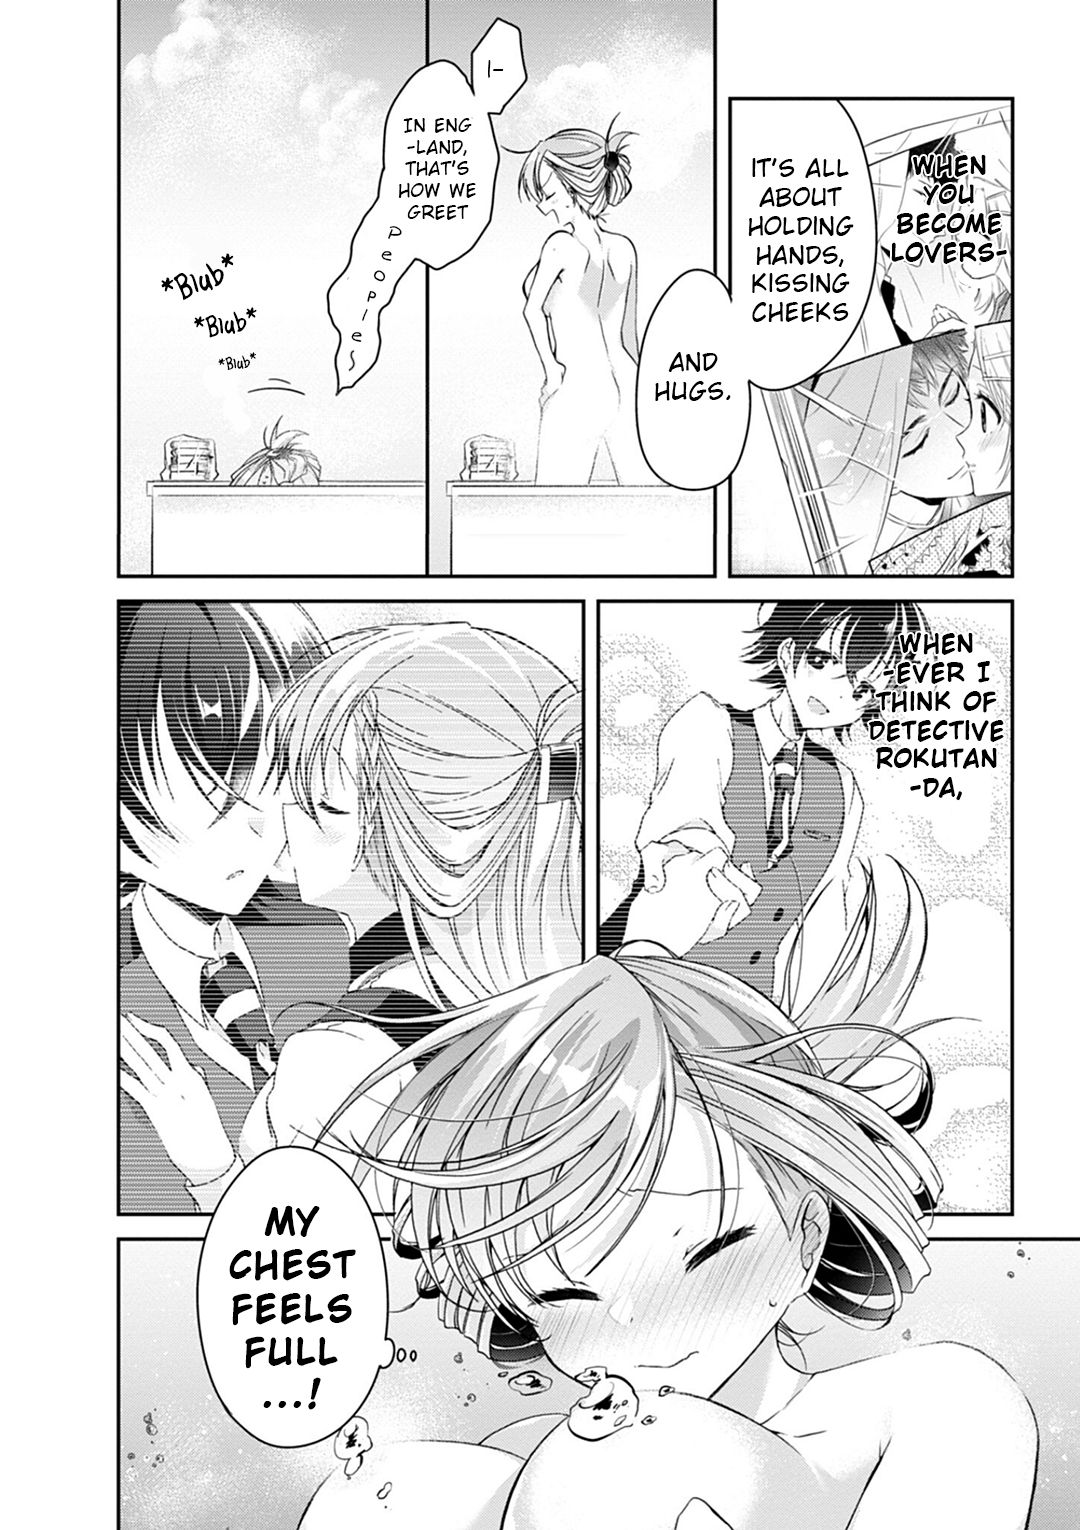 Isshiki-san Wants to Know About Love. - chapter 5.5 - #5